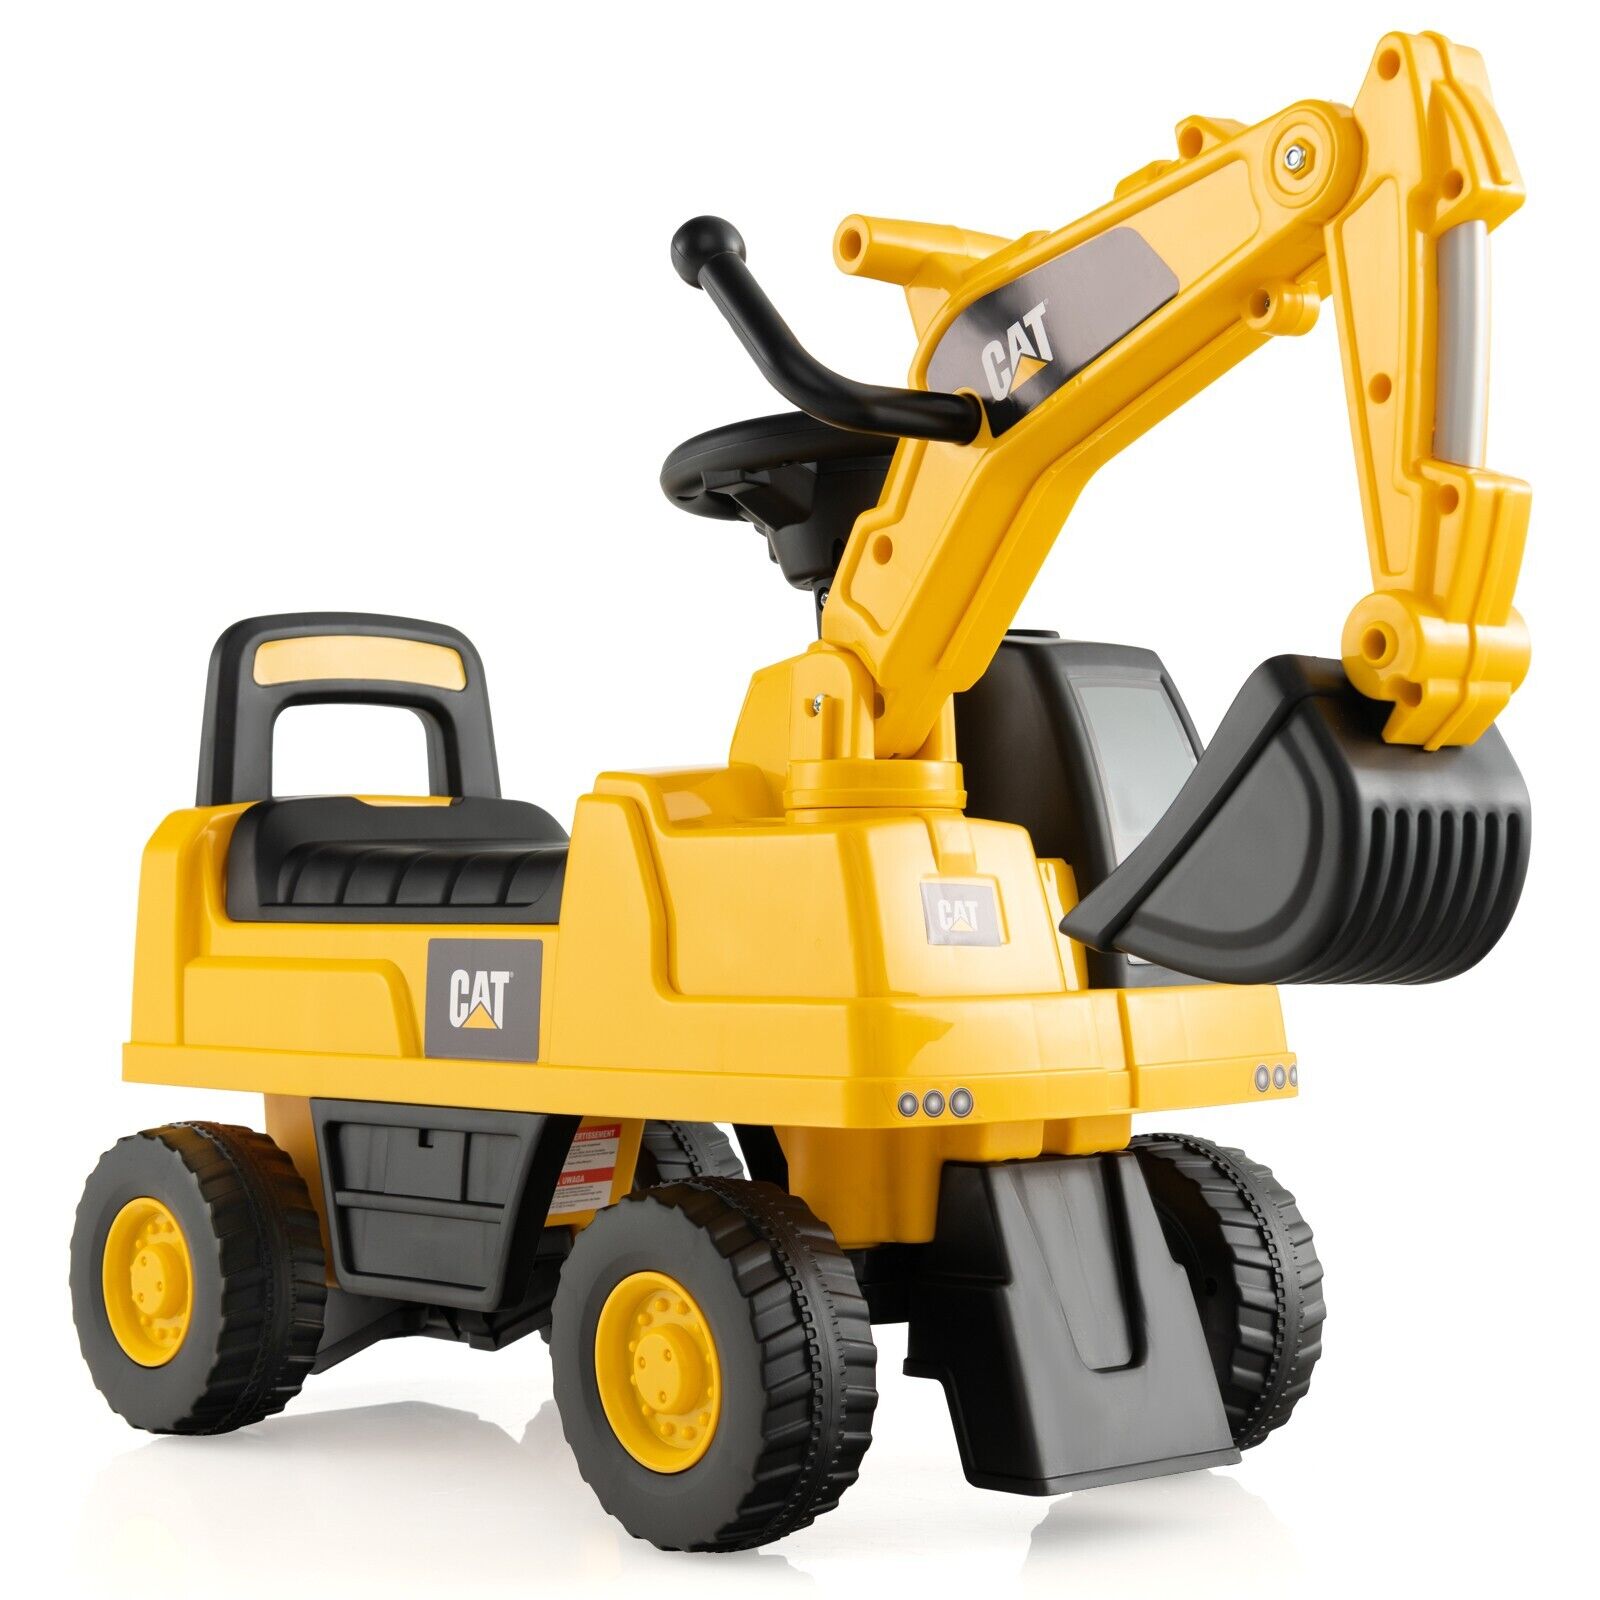 Kid's Rid-On Digger with Rotatable Digging Bucket-Yellow